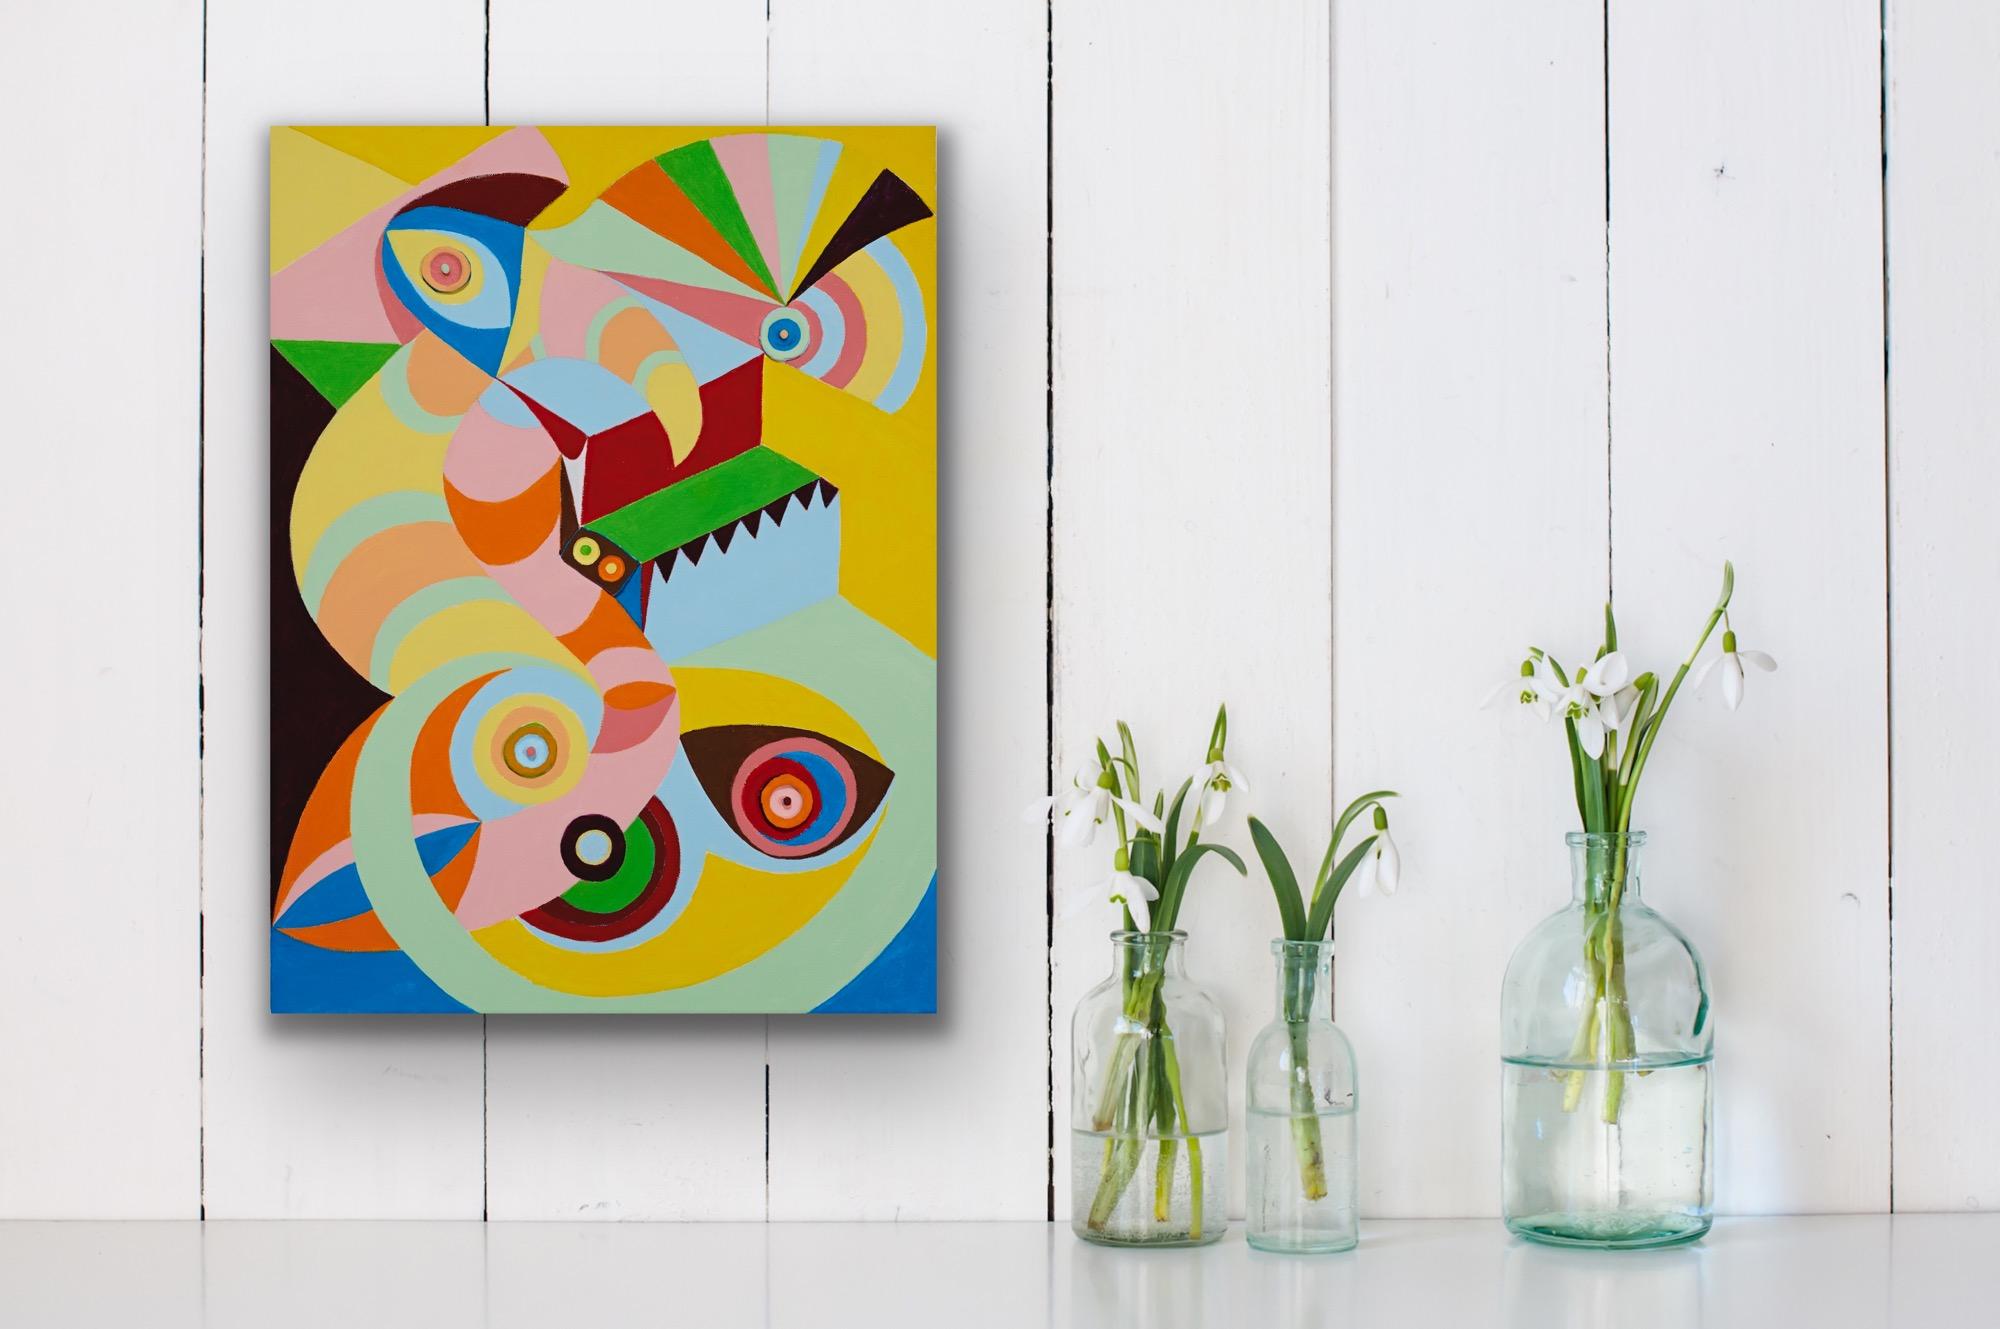 The whimsical colorful abstractions of Chieko Murasugi are inspired by the artists love of candy. They wonderfully mix together aspects of geometric and organic abstraction, painting with hard edges and added ceramic objects. 

Artist Statement:
In